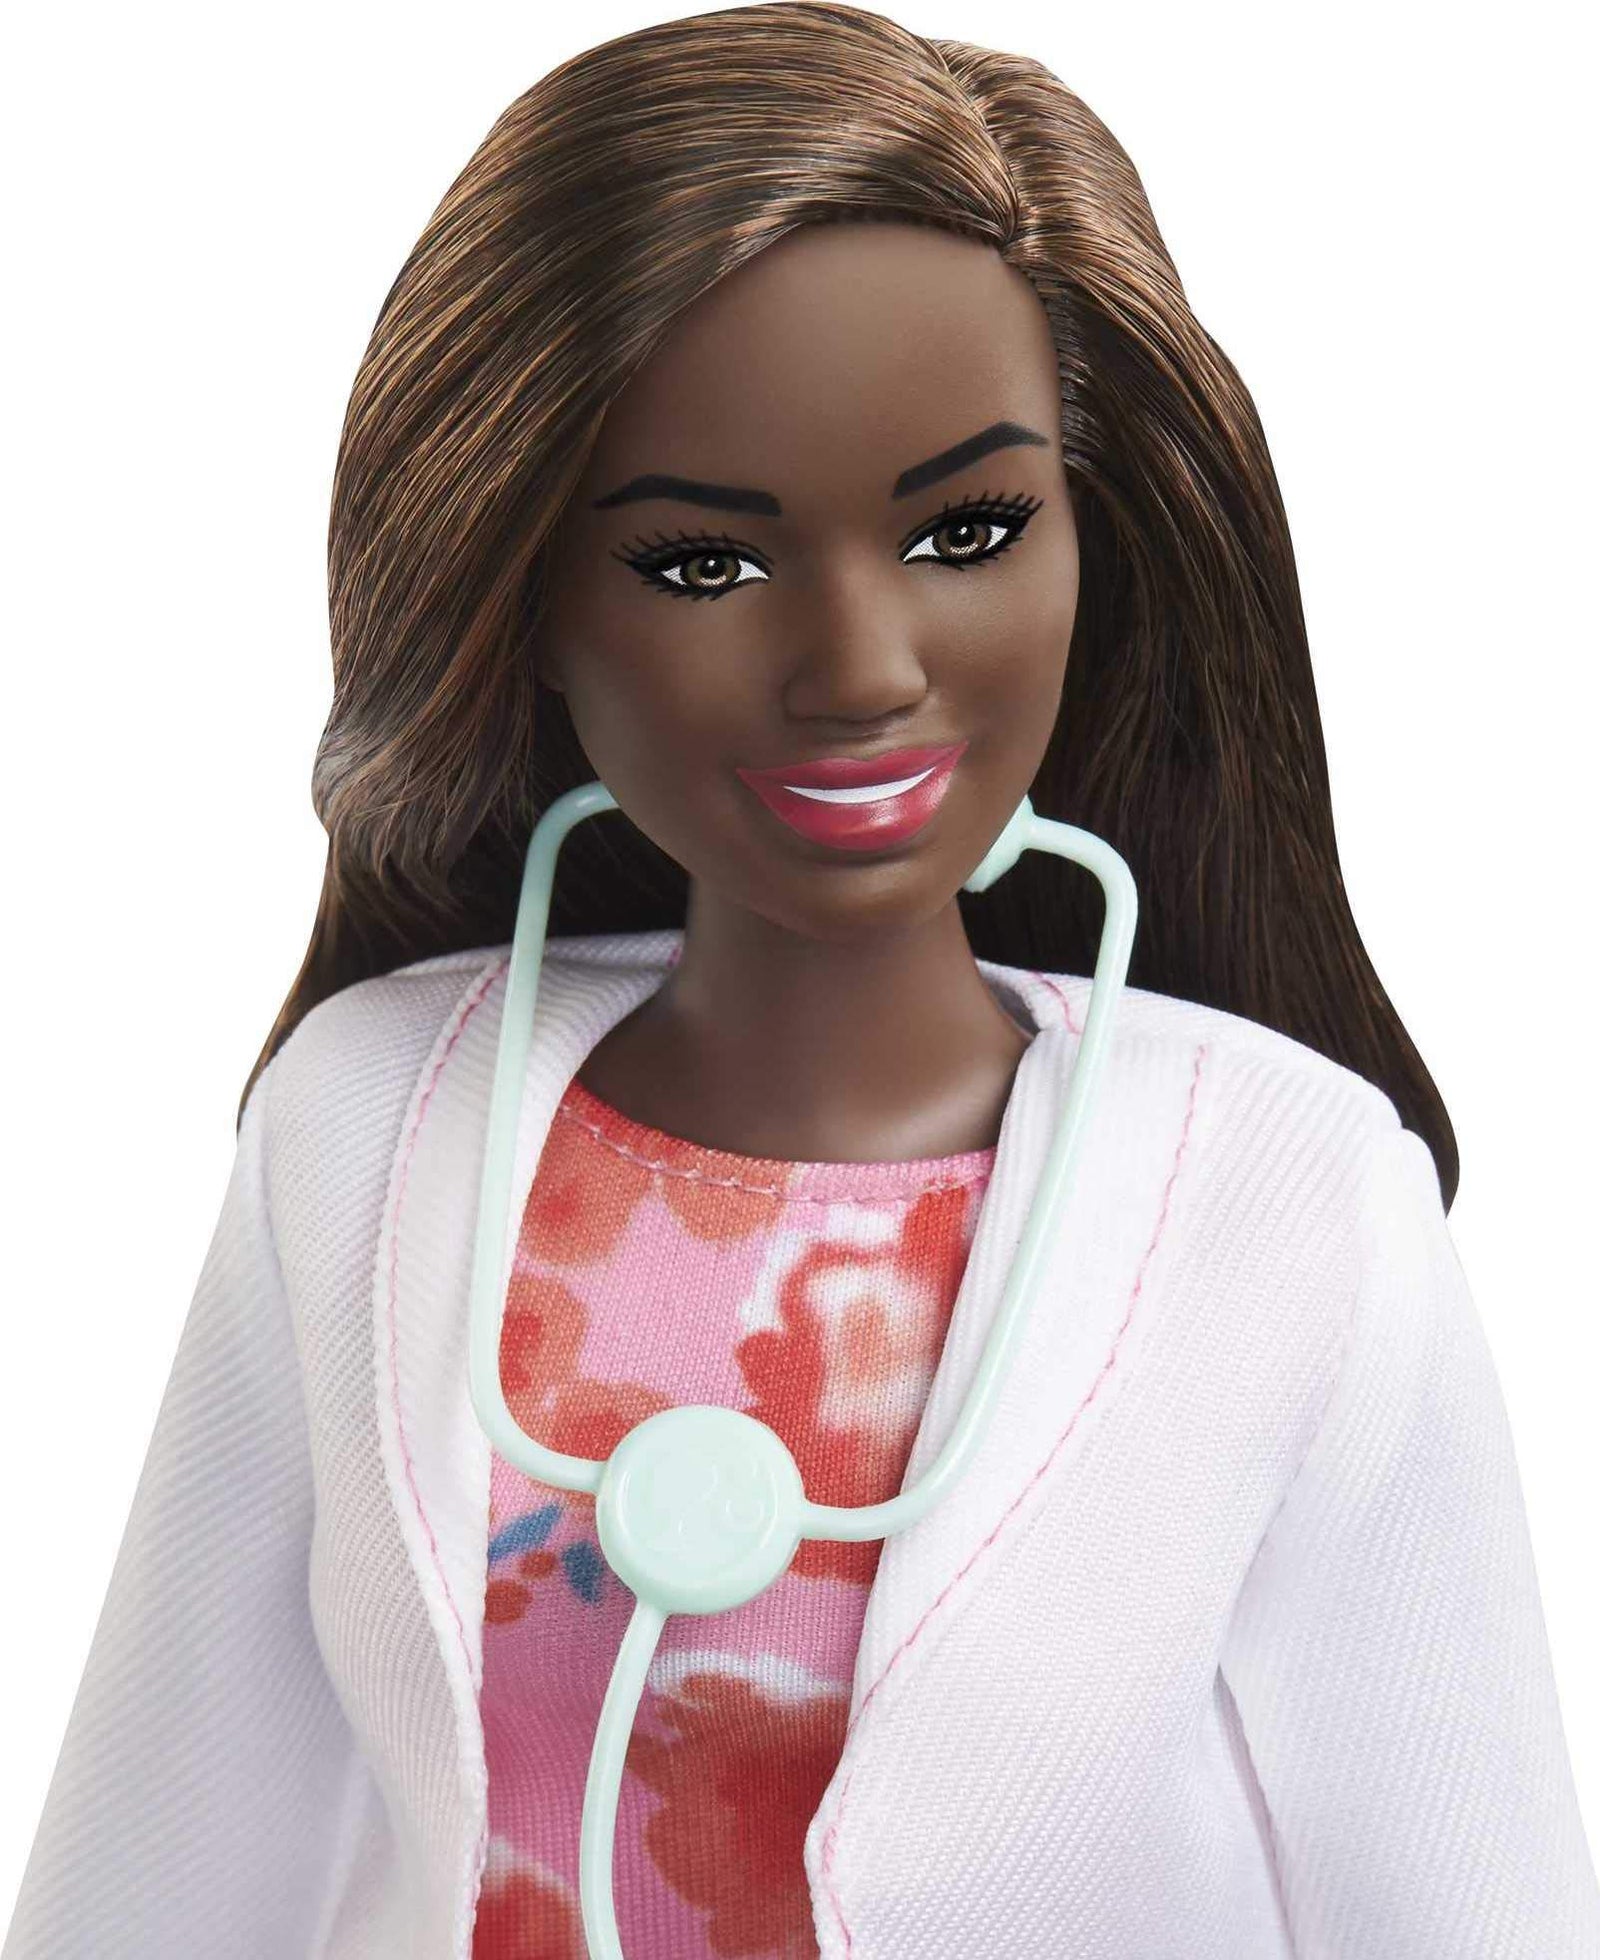 Barbie Doctor Doll (12-in/30.40-cm), Brunette Hair, Curvy Shape, Doctor Coat, Print Dress, Stethoscope Accessory, Great Toy Gift for Ages 3 Years Old & Up , White